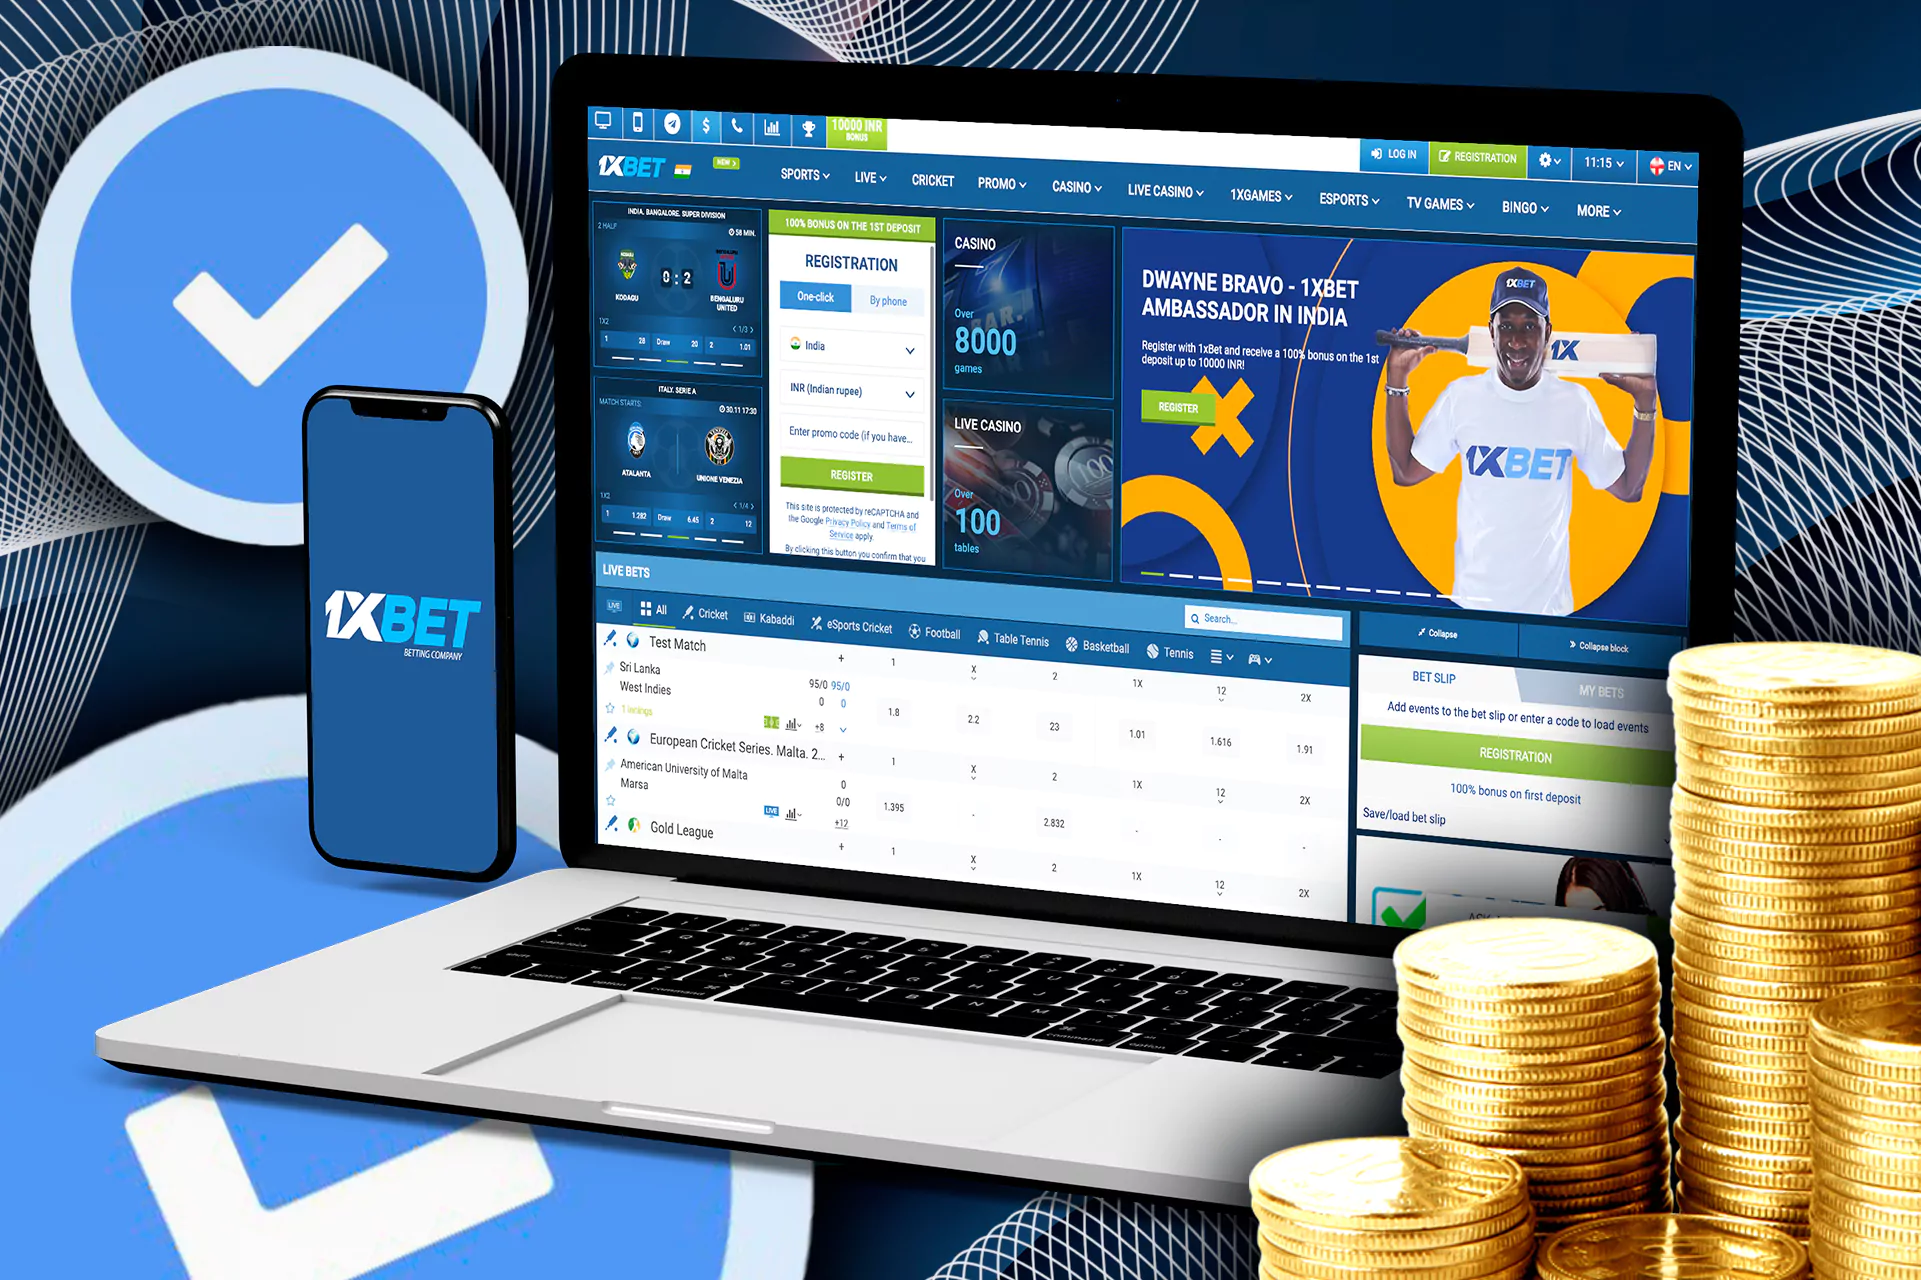 1xBet is a great choice for those who are kin of sports betting and casino gaming.